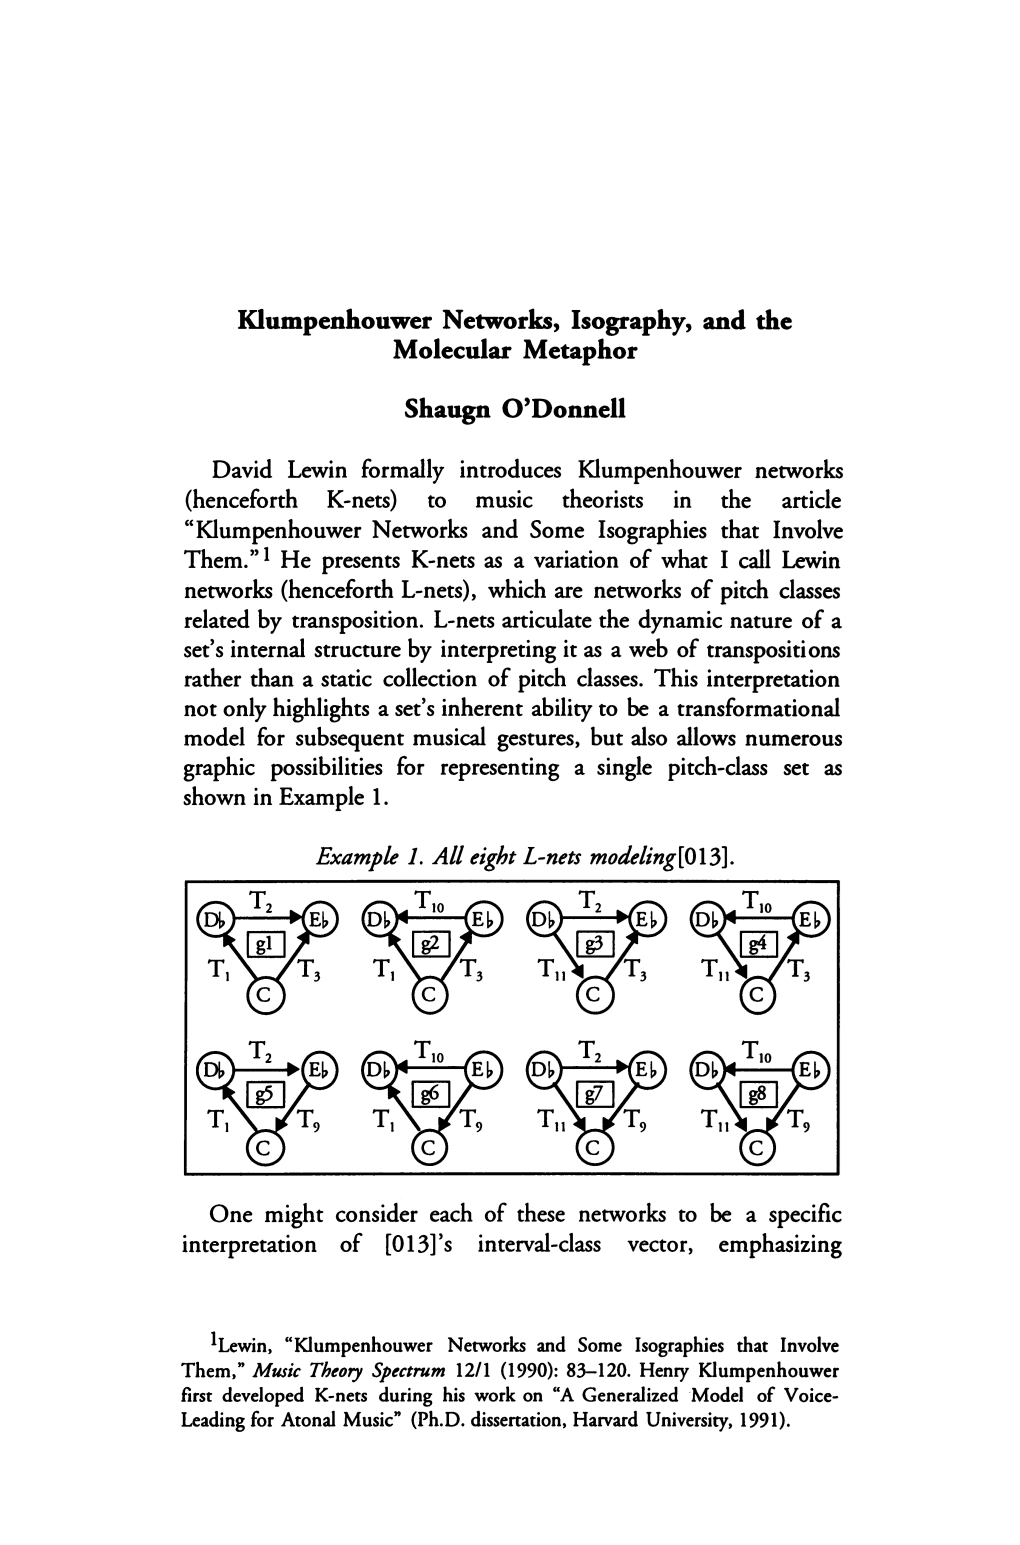 Klumpenhouwer Networks, Isography, and the Molecular Metaphor